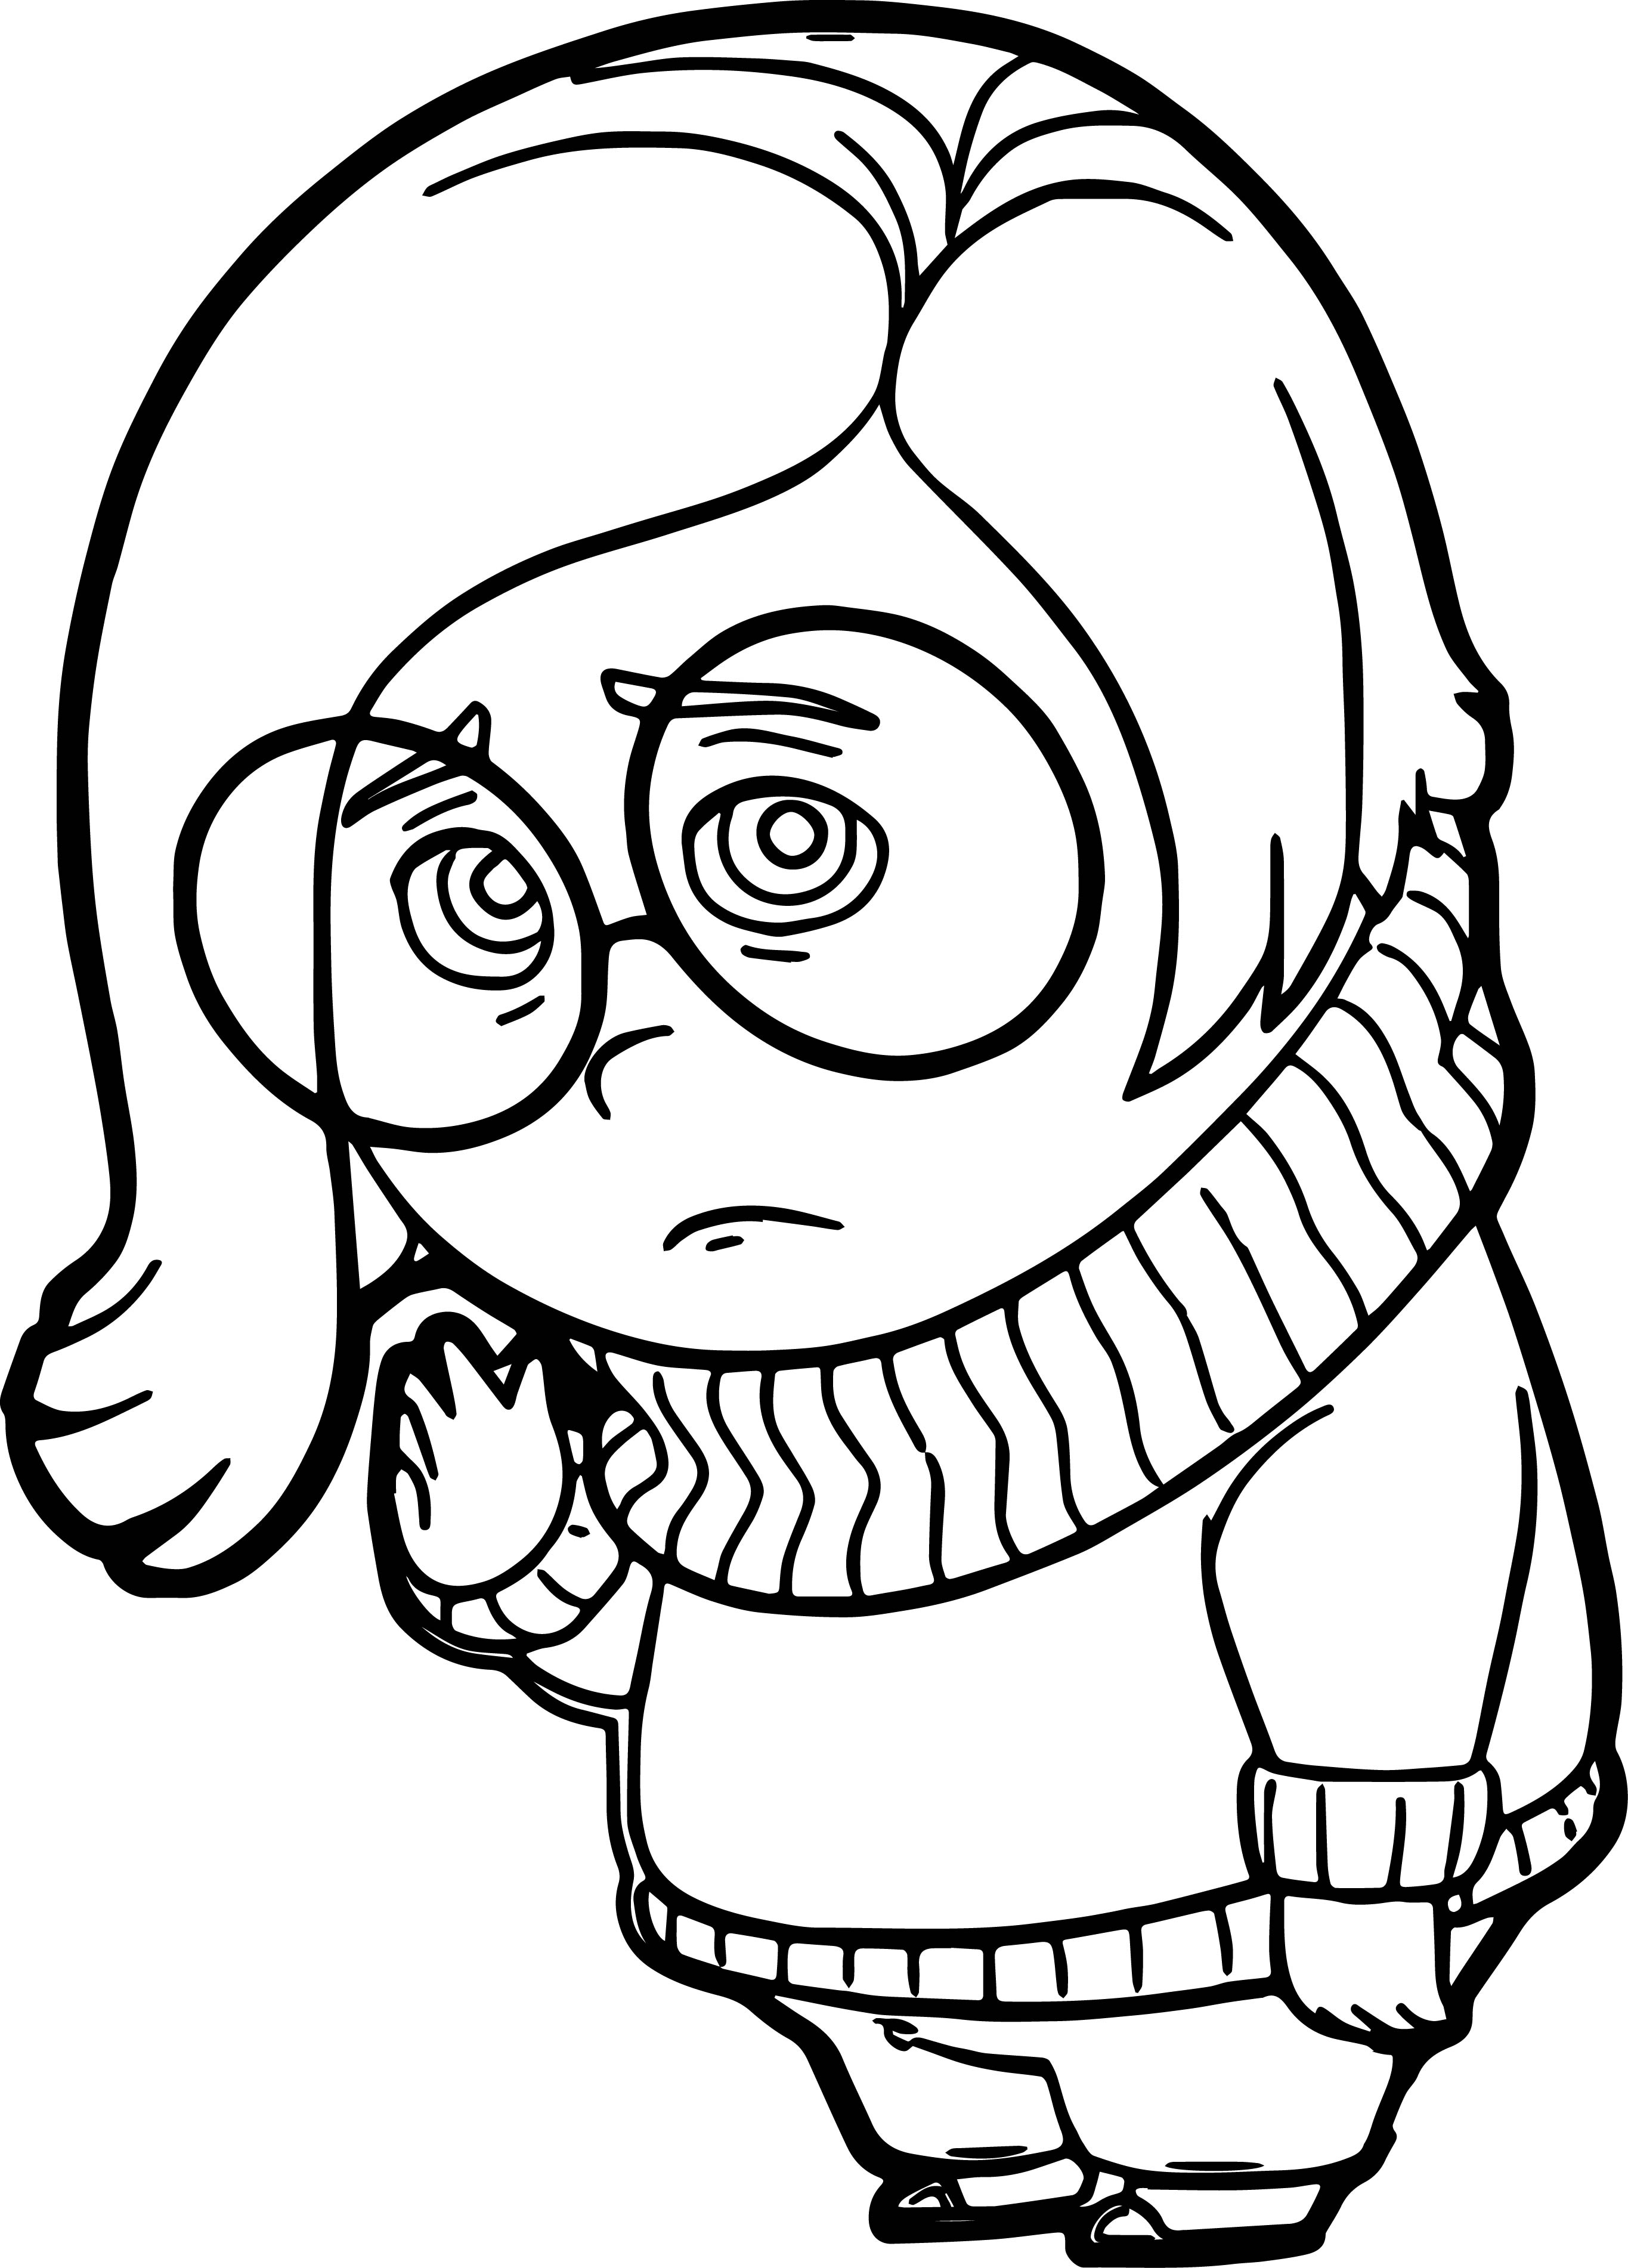 Sadness 4 Coloring Pages - Wecoloringpage.com